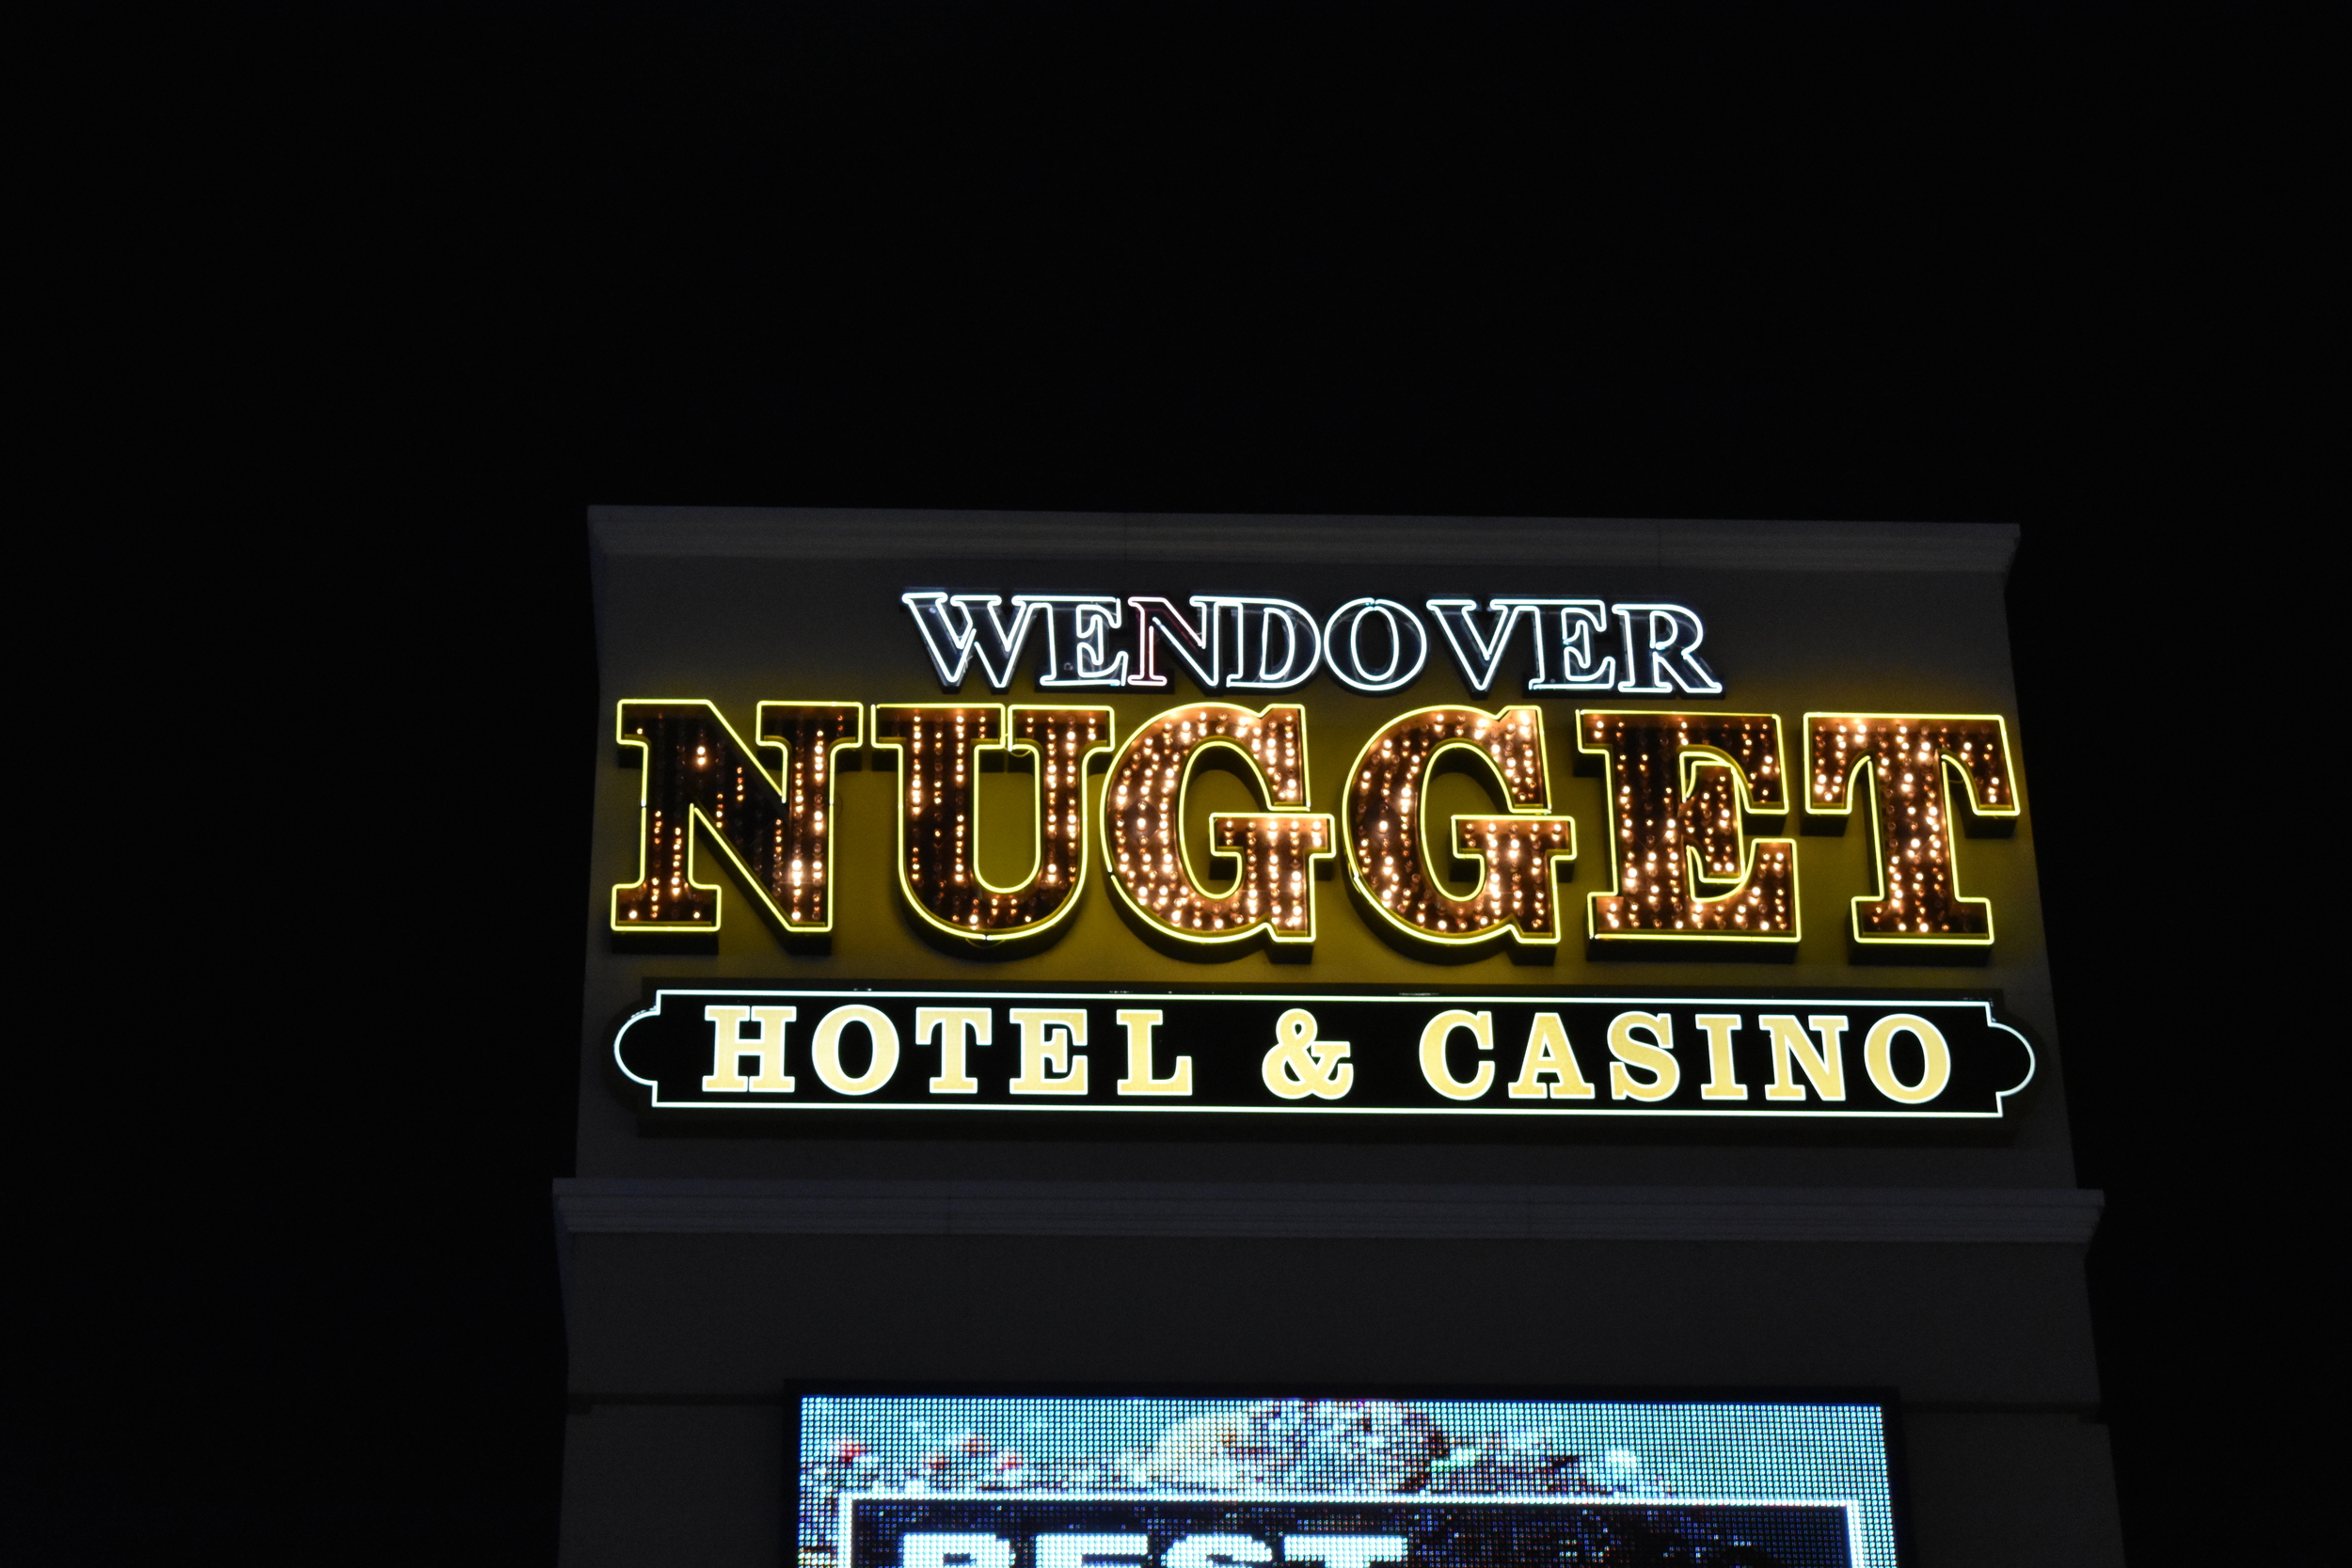 The Wendover Nugget Hotel & Casino mounted sign, Wendover, Nevada